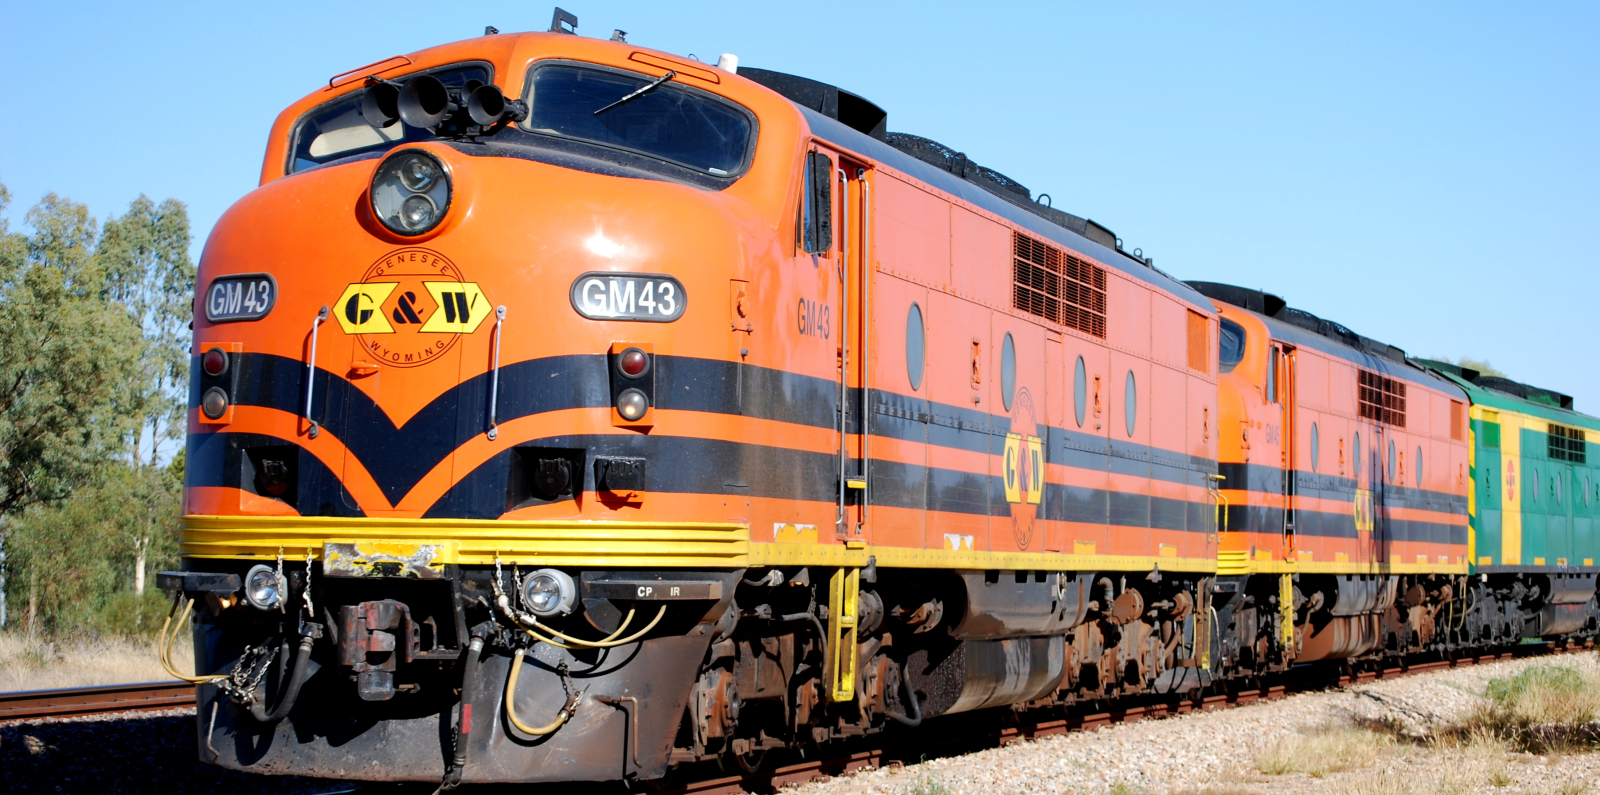 Genesee & Wyoming Australia's GM43 along with two other units in front of a barley train in April 2008 in Clare Valley, South Australia